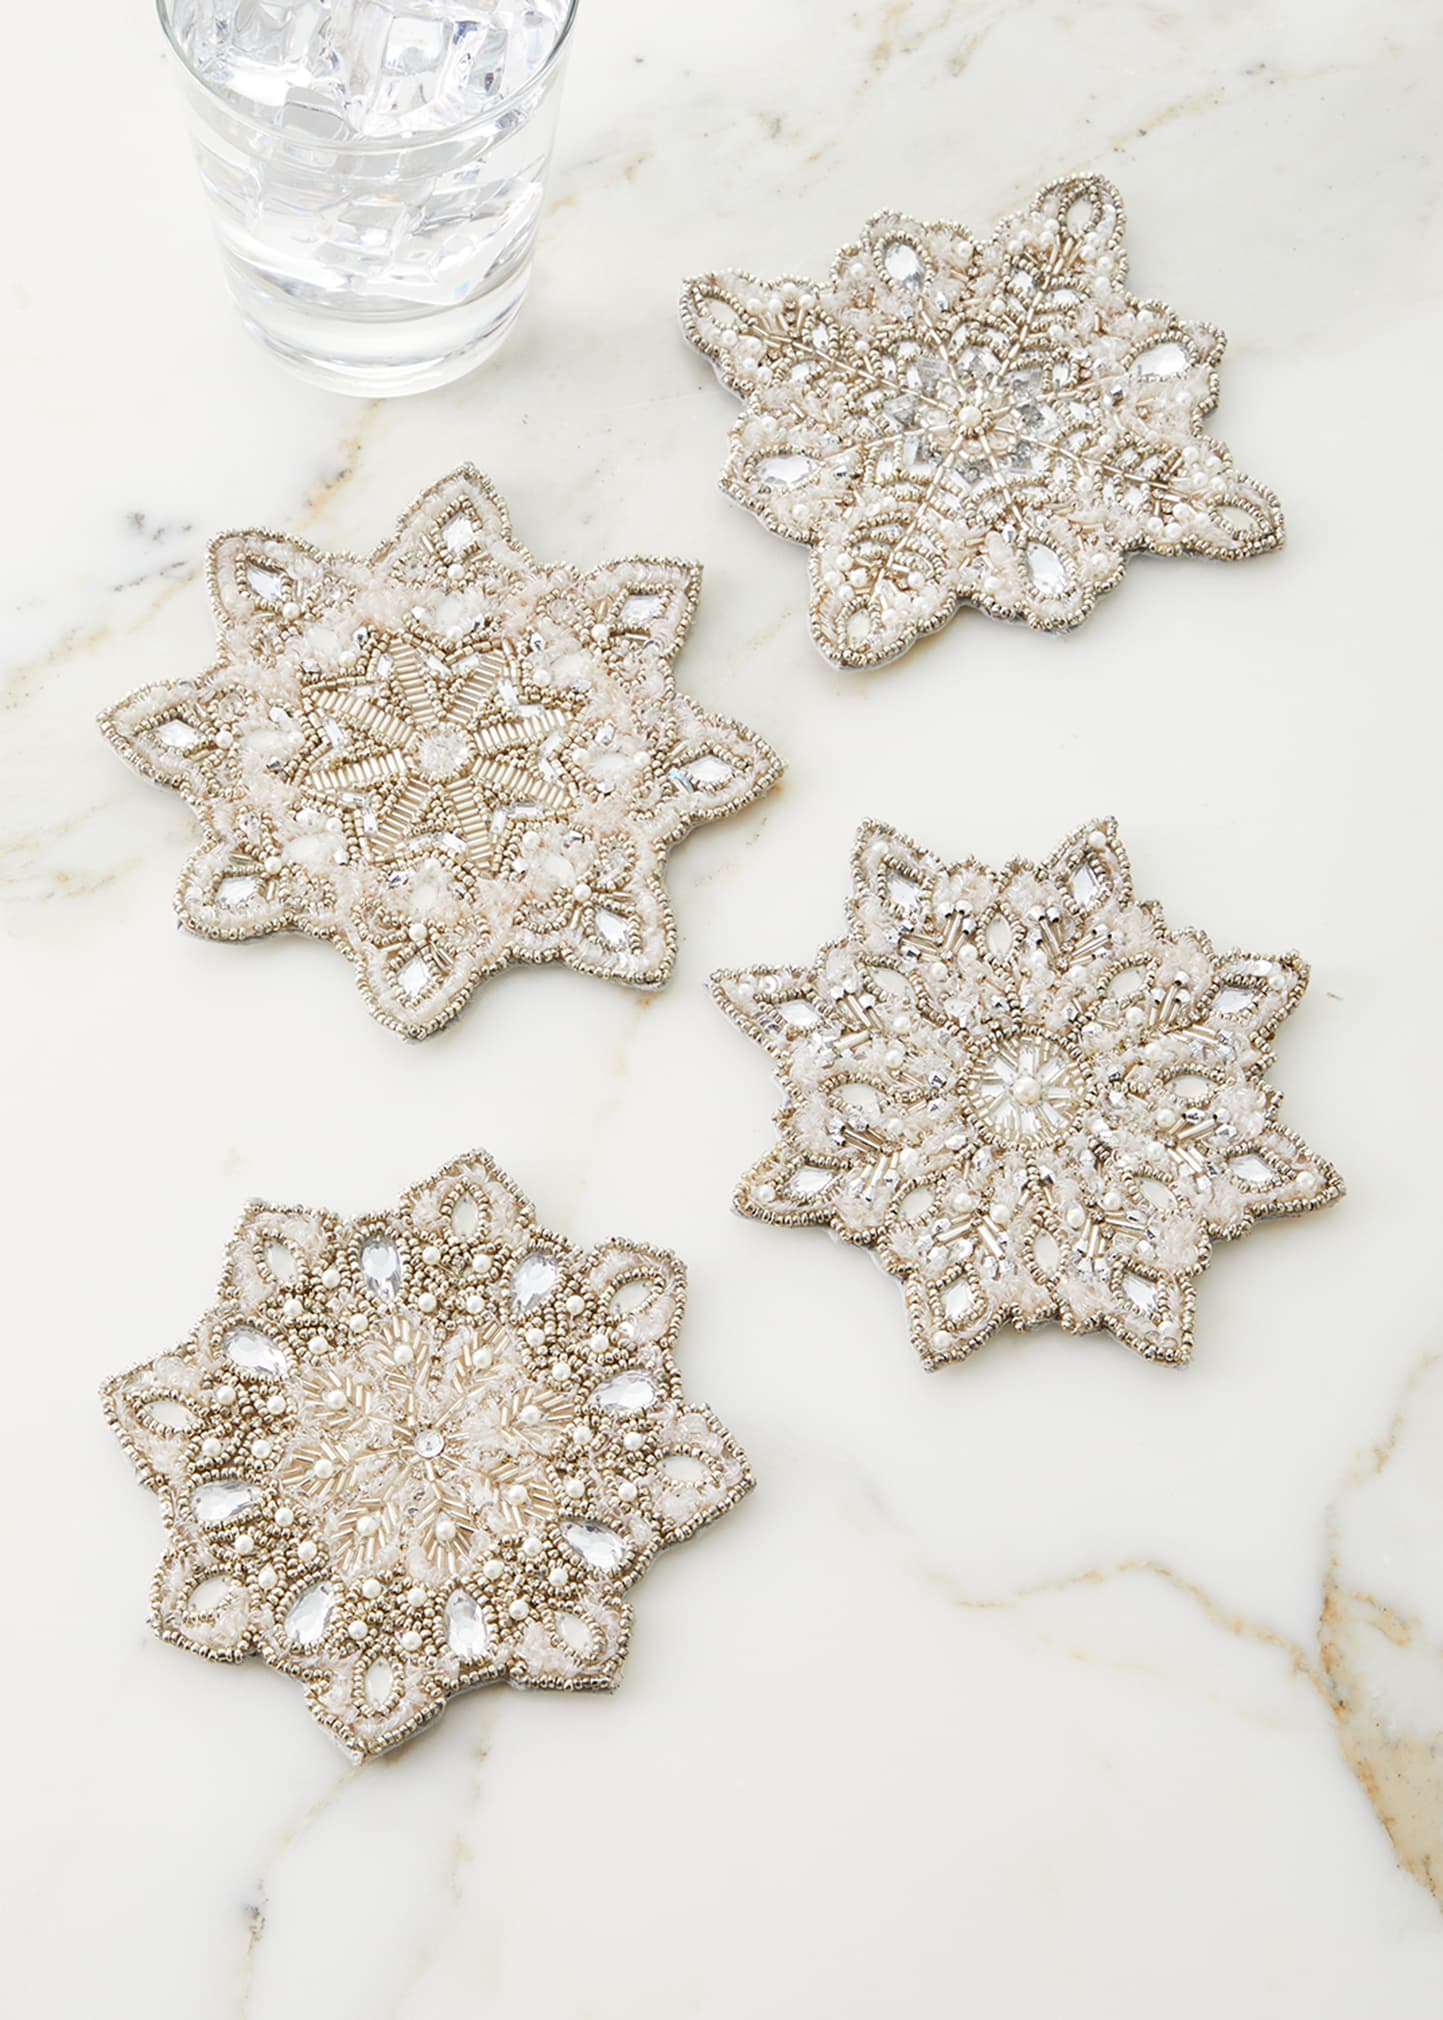 Snowflake Coasters in a Gift Bag, Set of 4